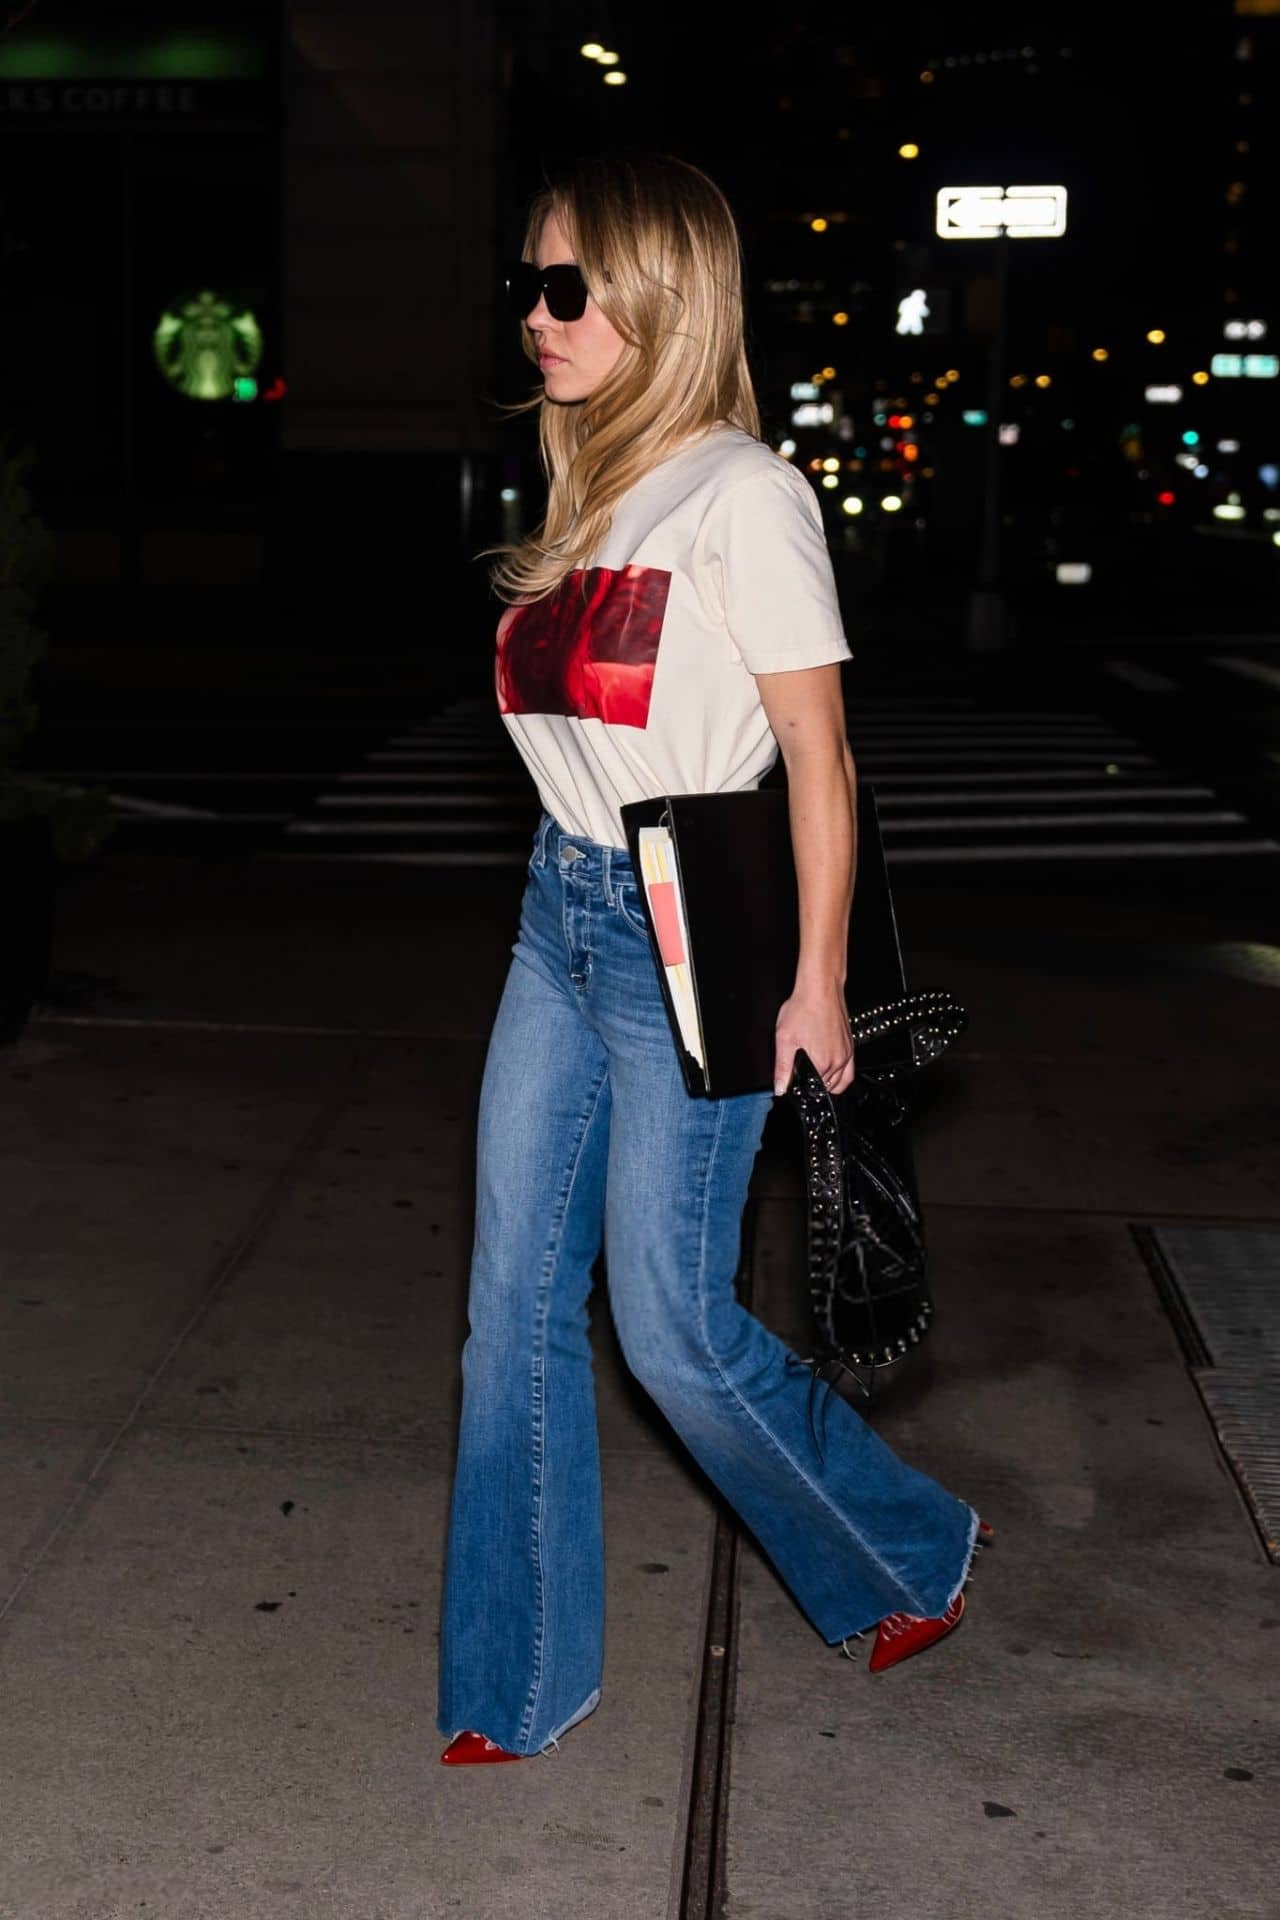 sydney sweeney turns nyc streets into runway with her effortless style 1